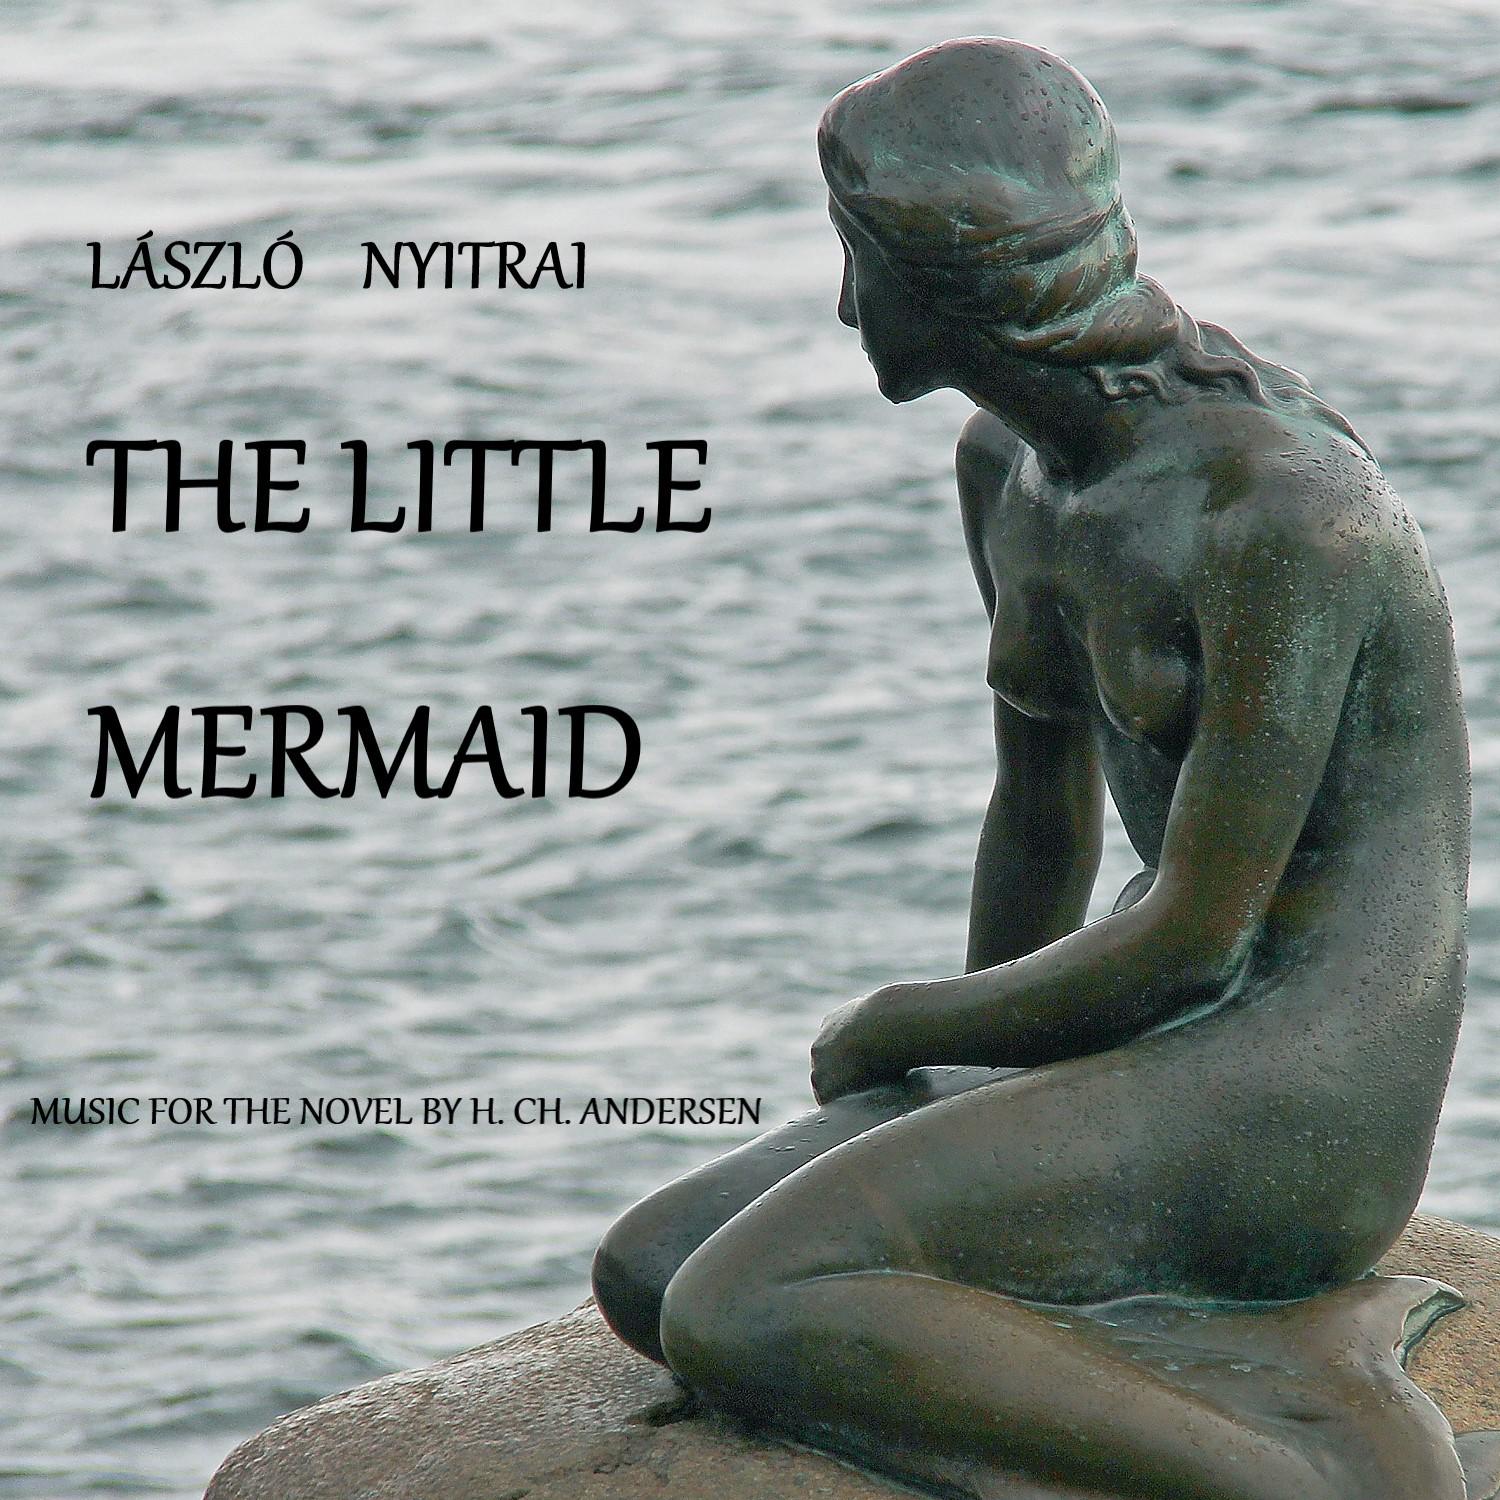 The little mermaid (Music for the novel of H. Ch. Andersen)